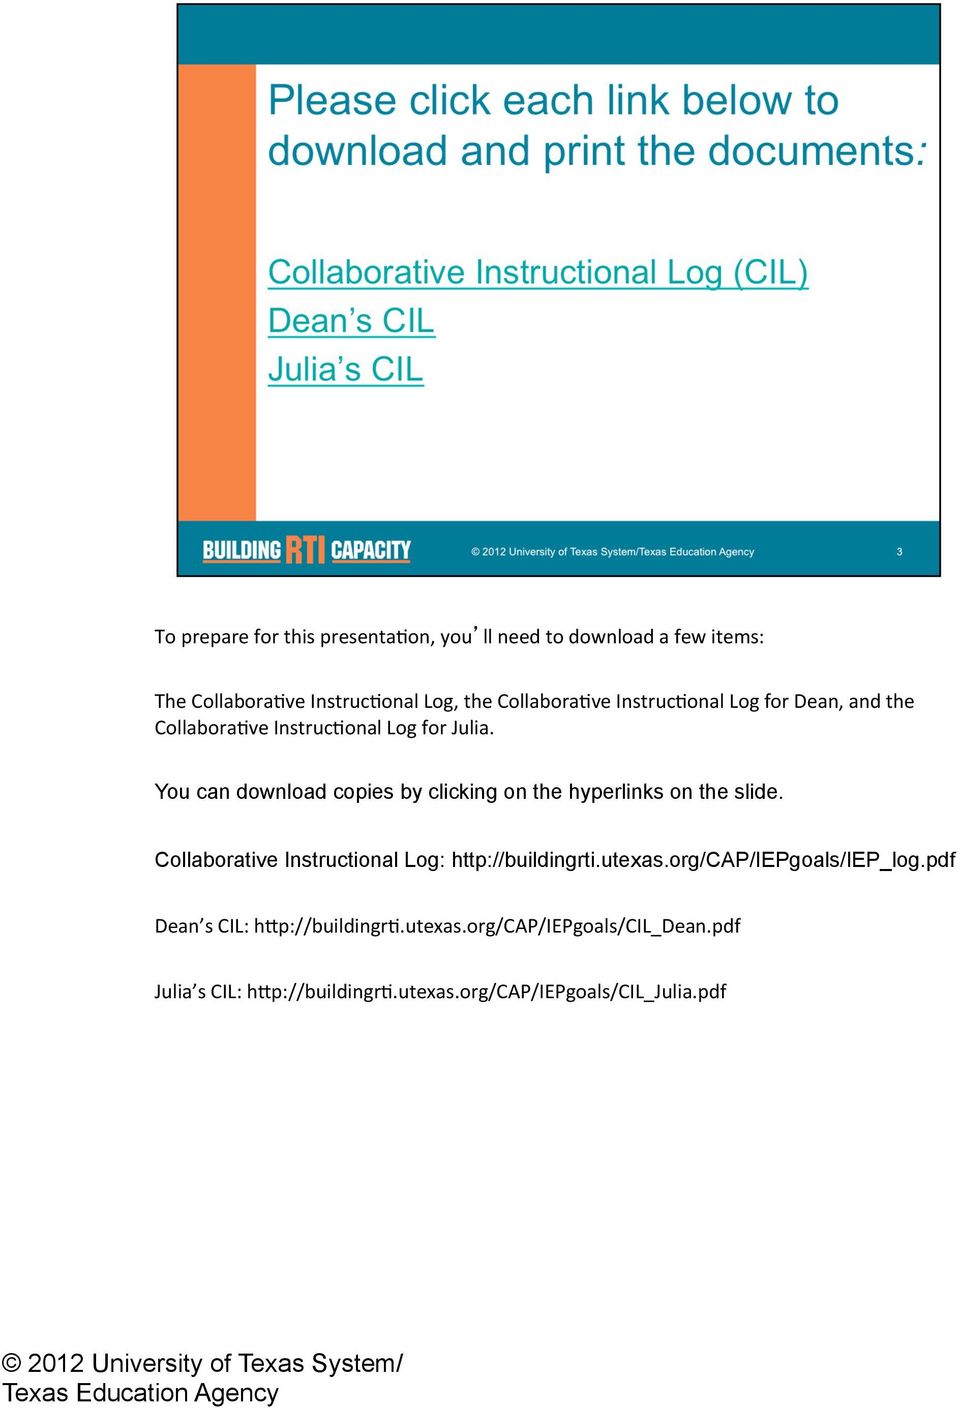 You can download copies by clicking on the hyperlinks on the slide. Collaborative Instructional Log: http://buildingrti.